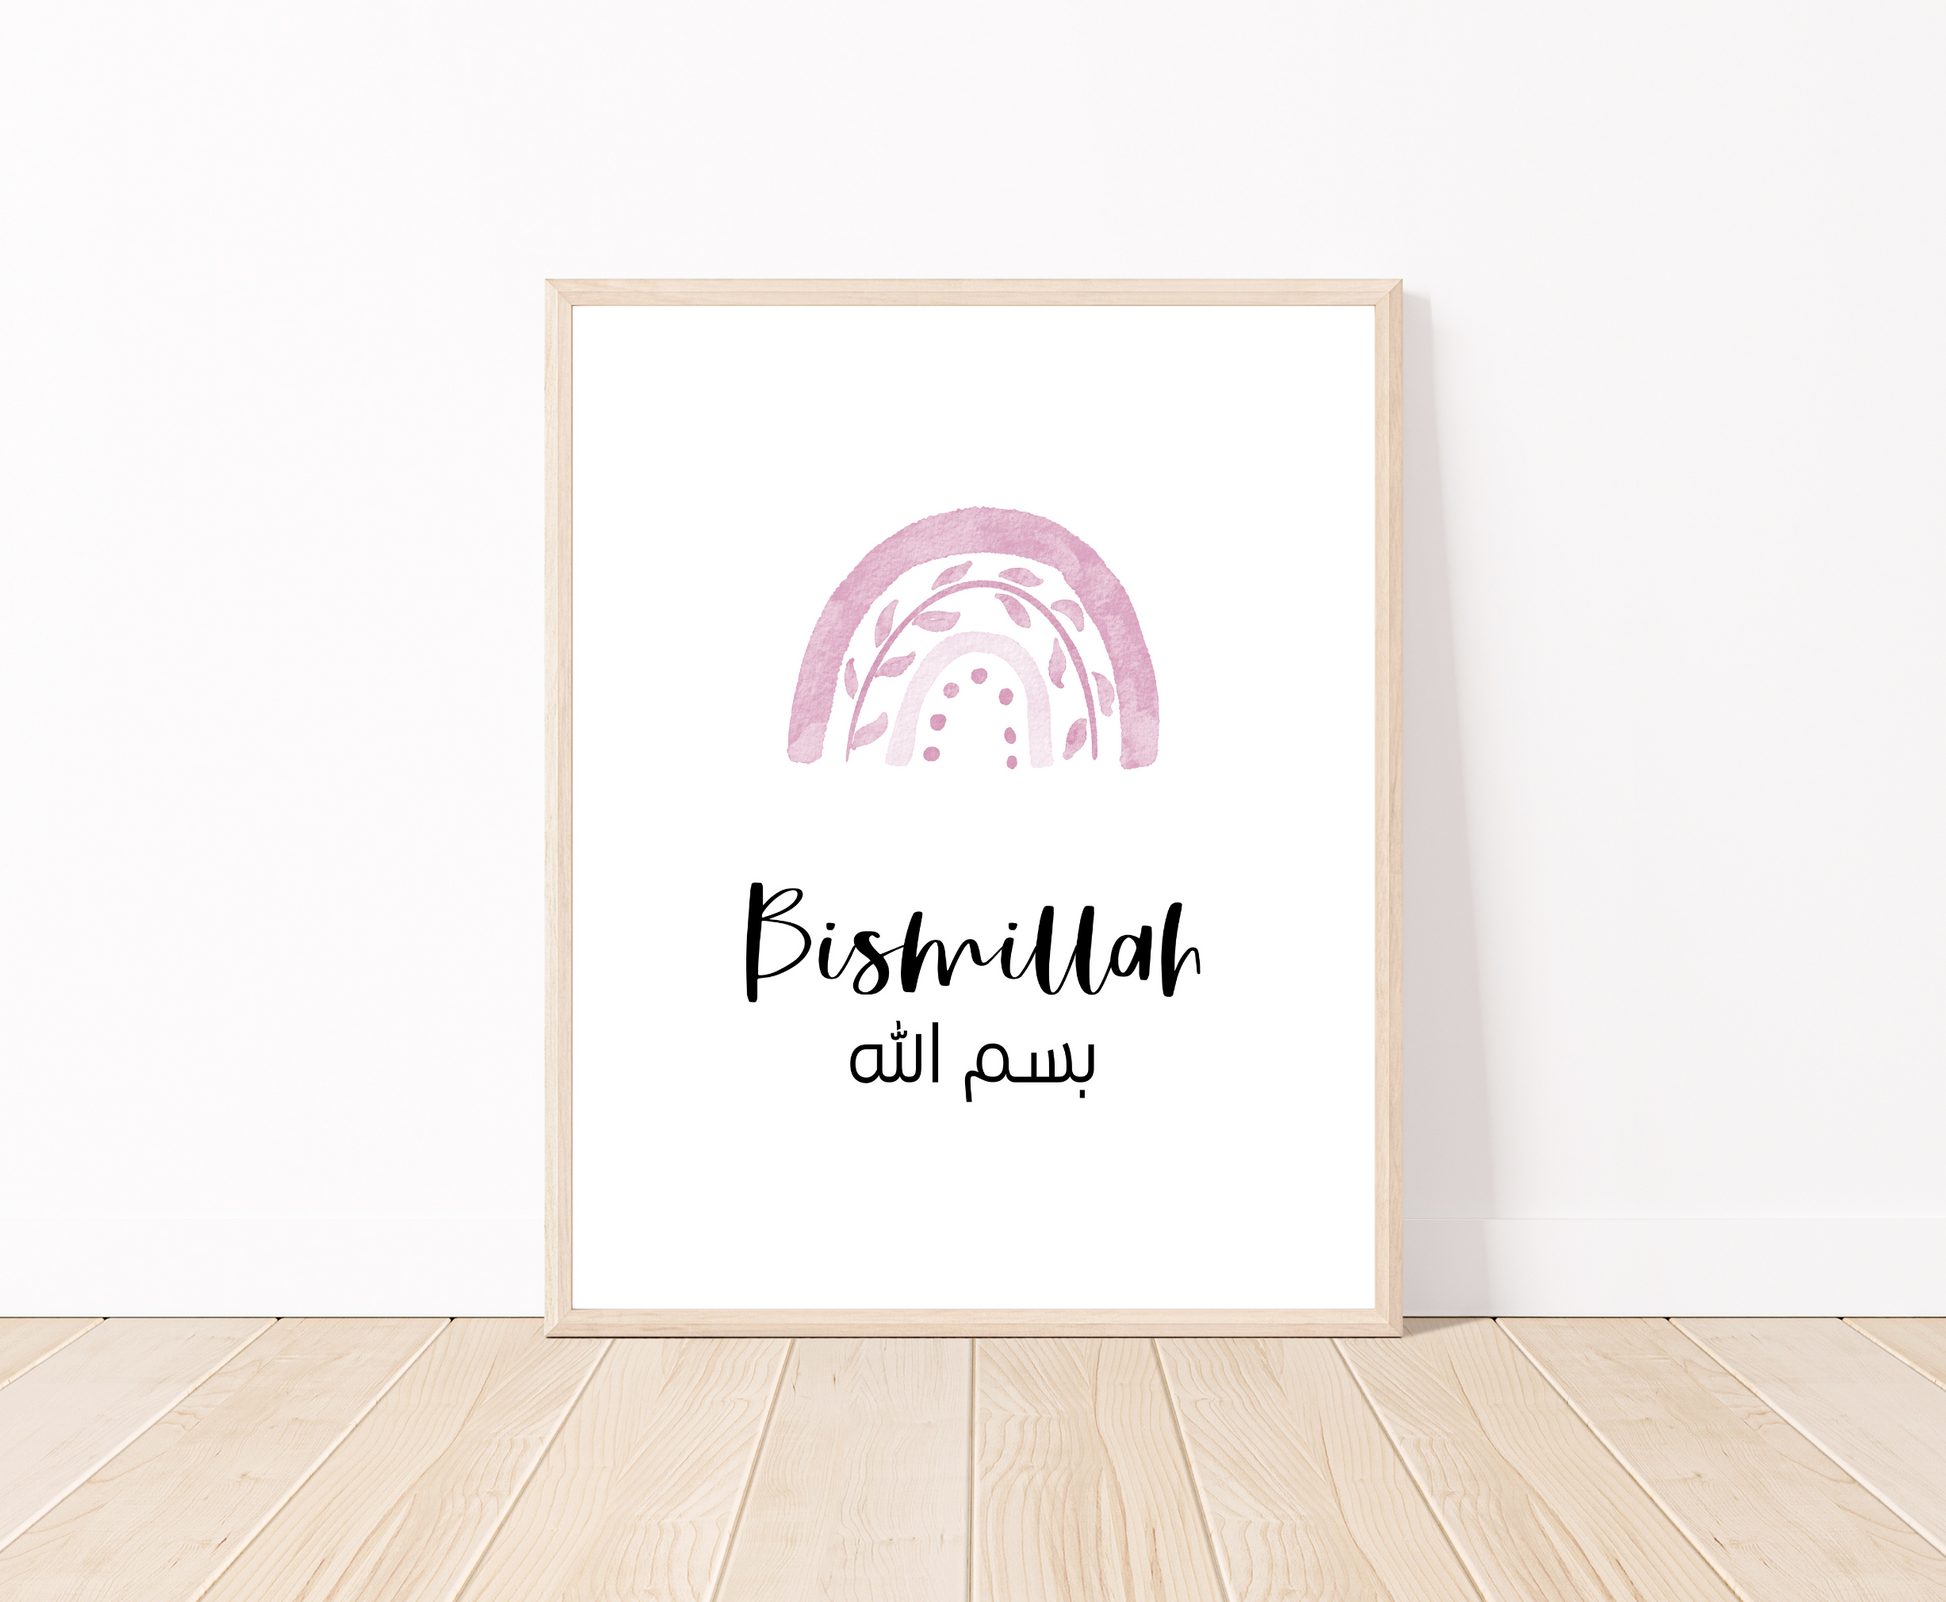 A digital print placed on a white wall and parquet flooring showing a pink rainbow with a piece of writing below that says: “Bismillah”.